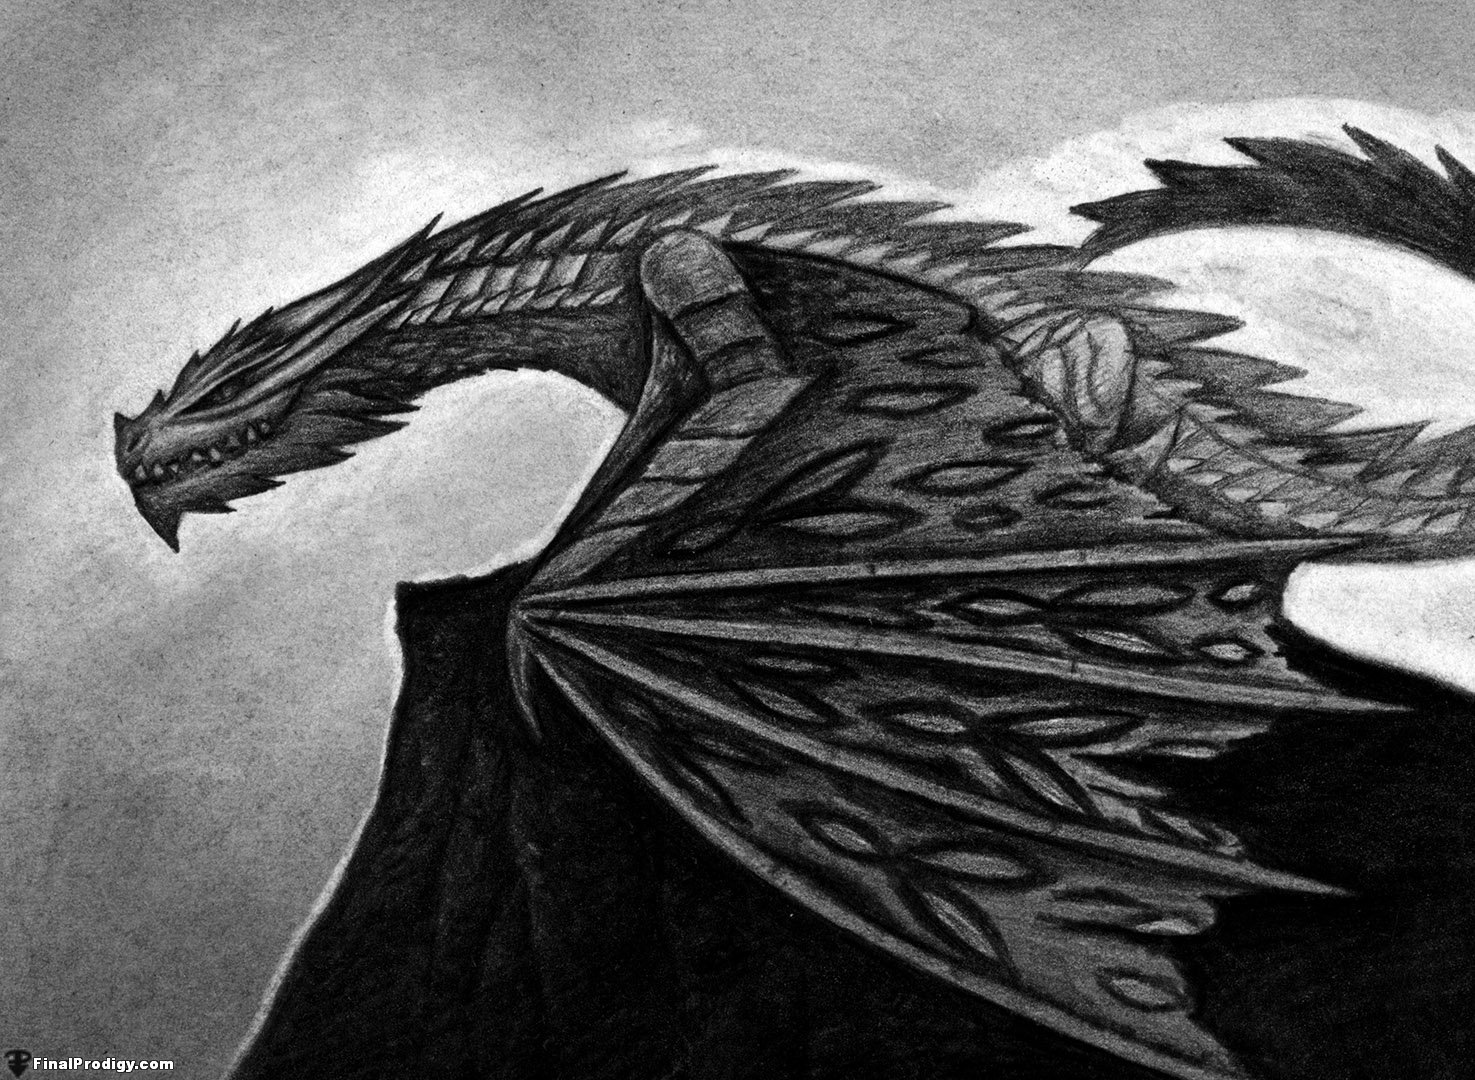 How to Draw a Wyvern - FinalProdigy.com